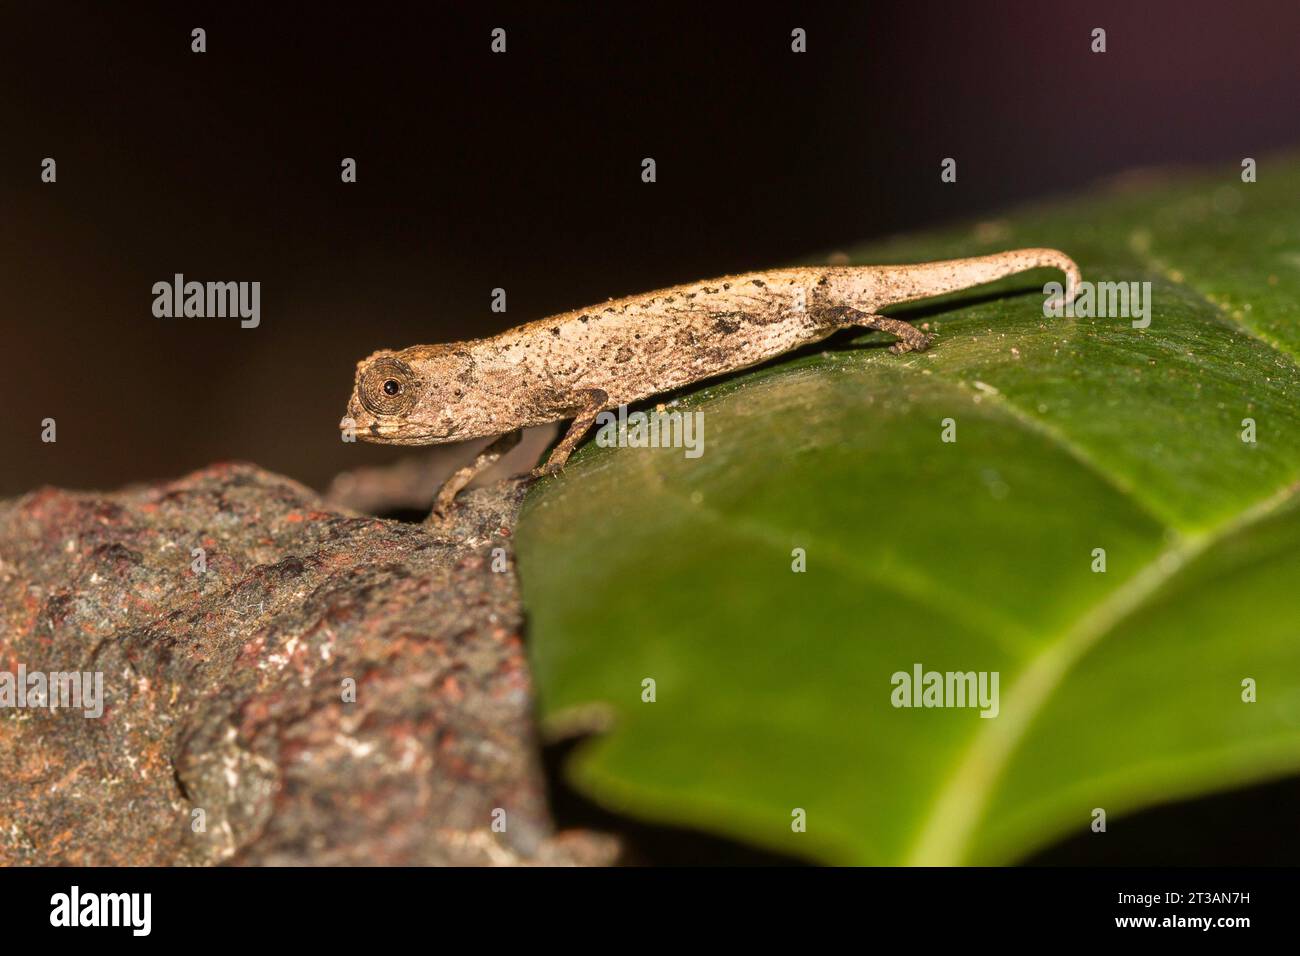 Brookesia minima is one of the smallest chameleons in the world in Madagascar sitting on a leaf Stock Photo